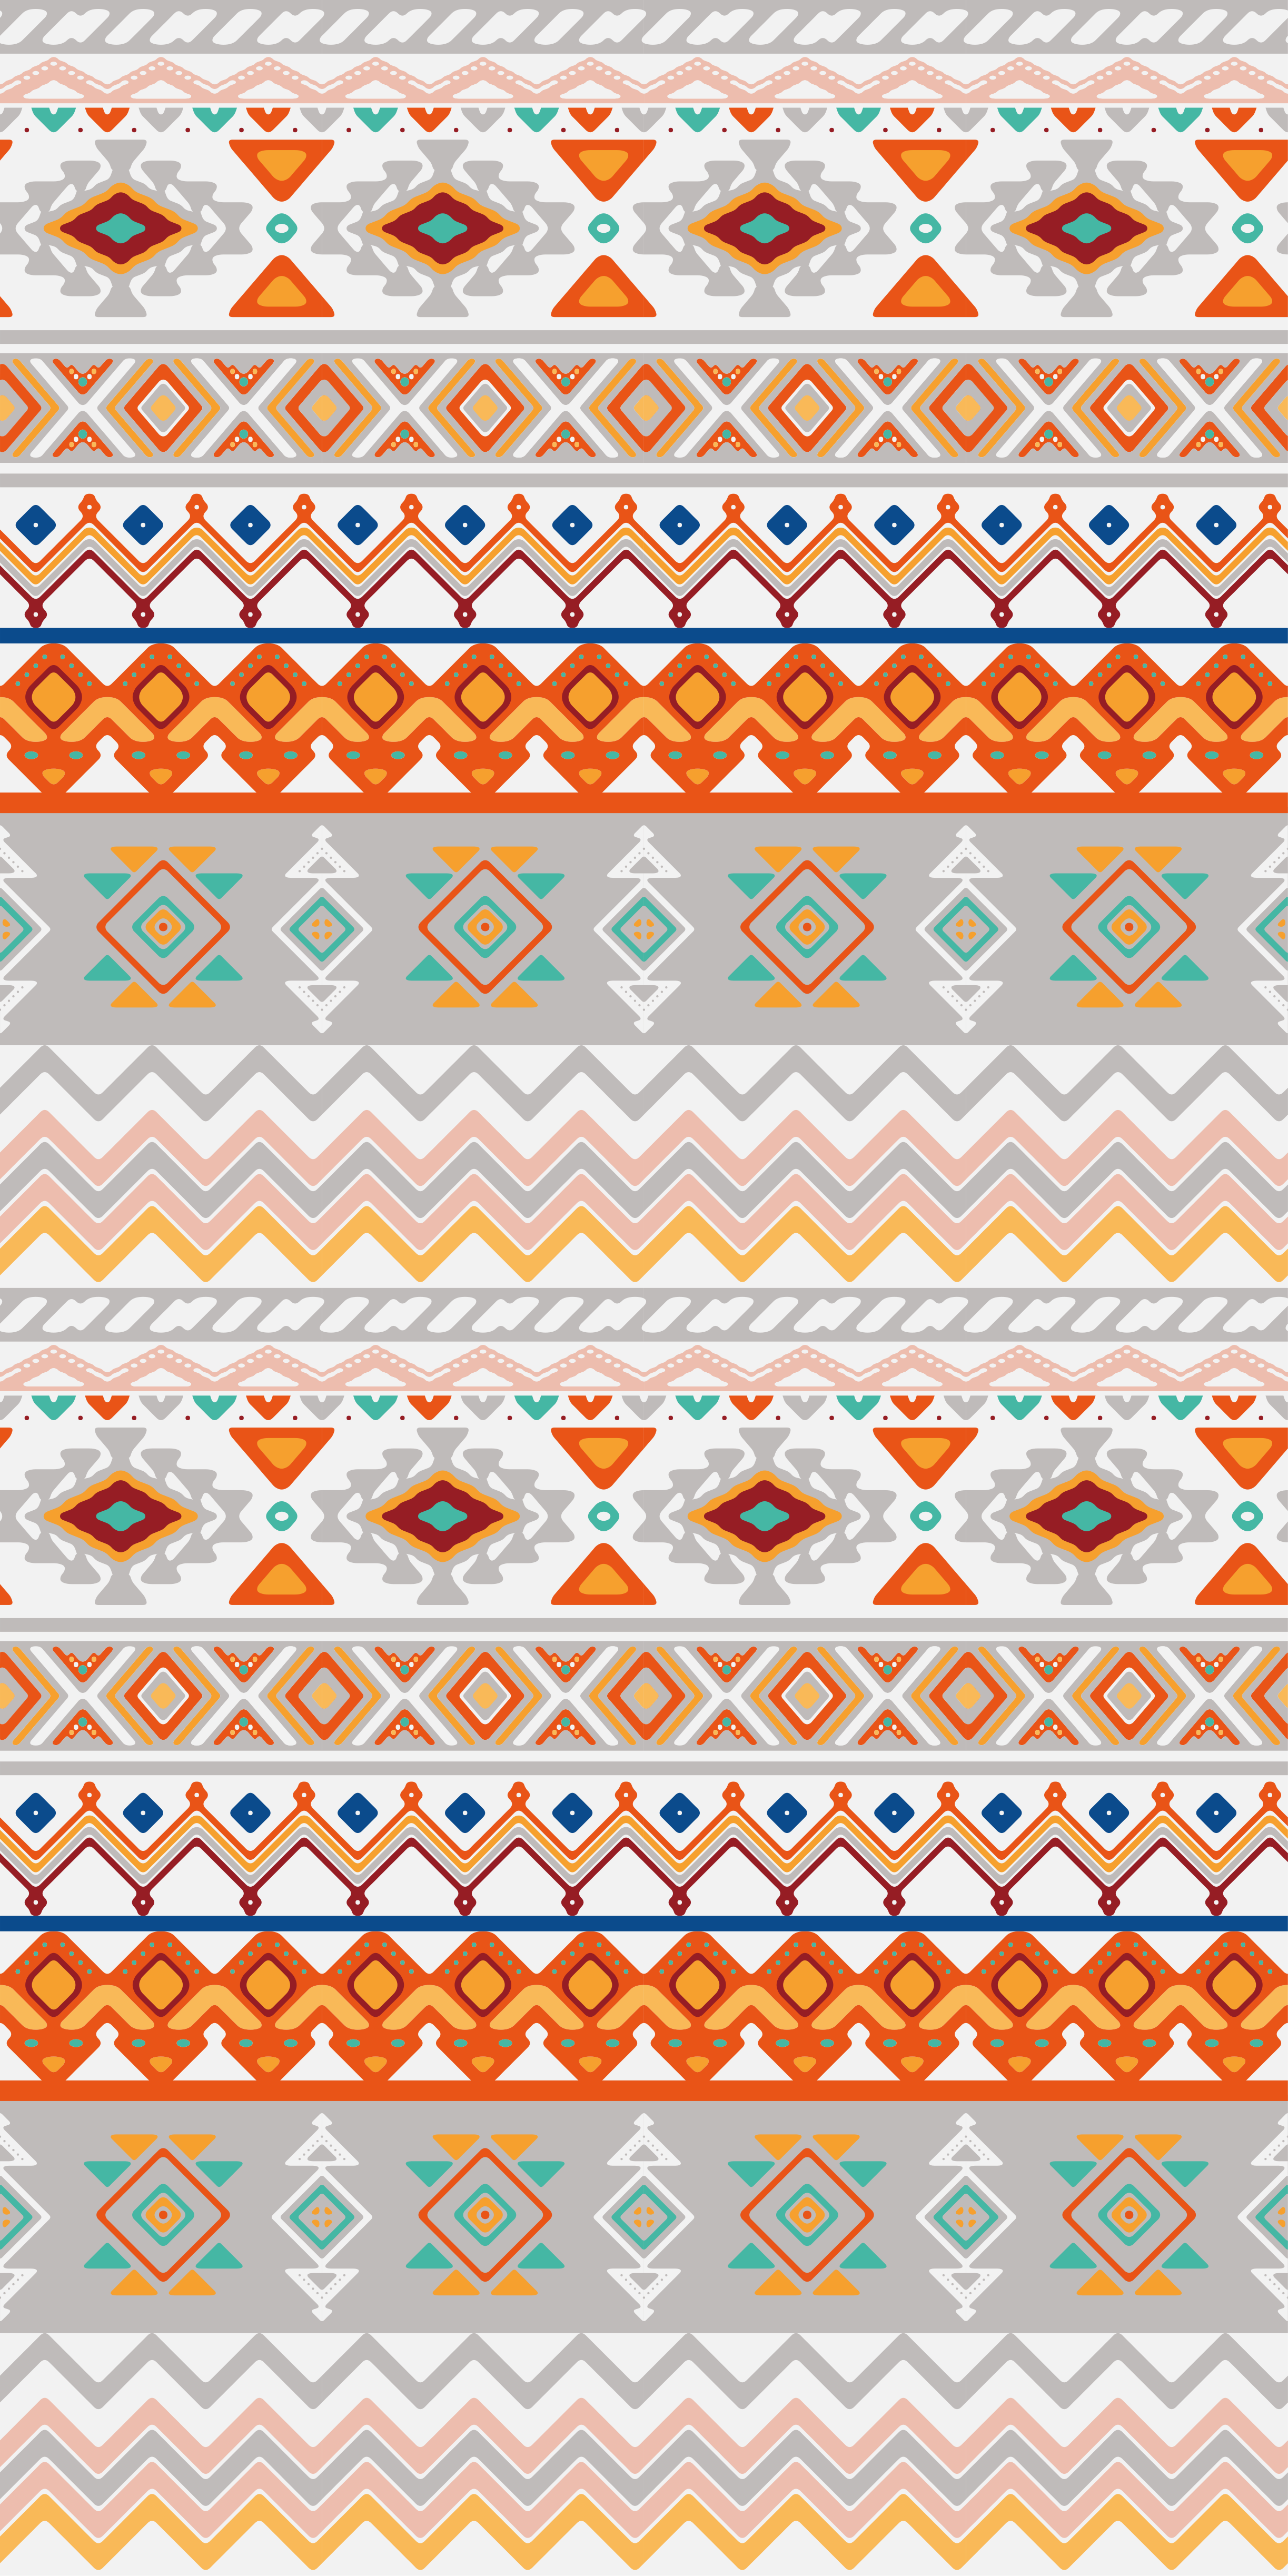 Abstract Bohemian Indian Textile Ethnic Seamless Pattern Ornamental Vector  Ethnic Geomertric Art Background Stock Illustration  Download Image Now   iStock